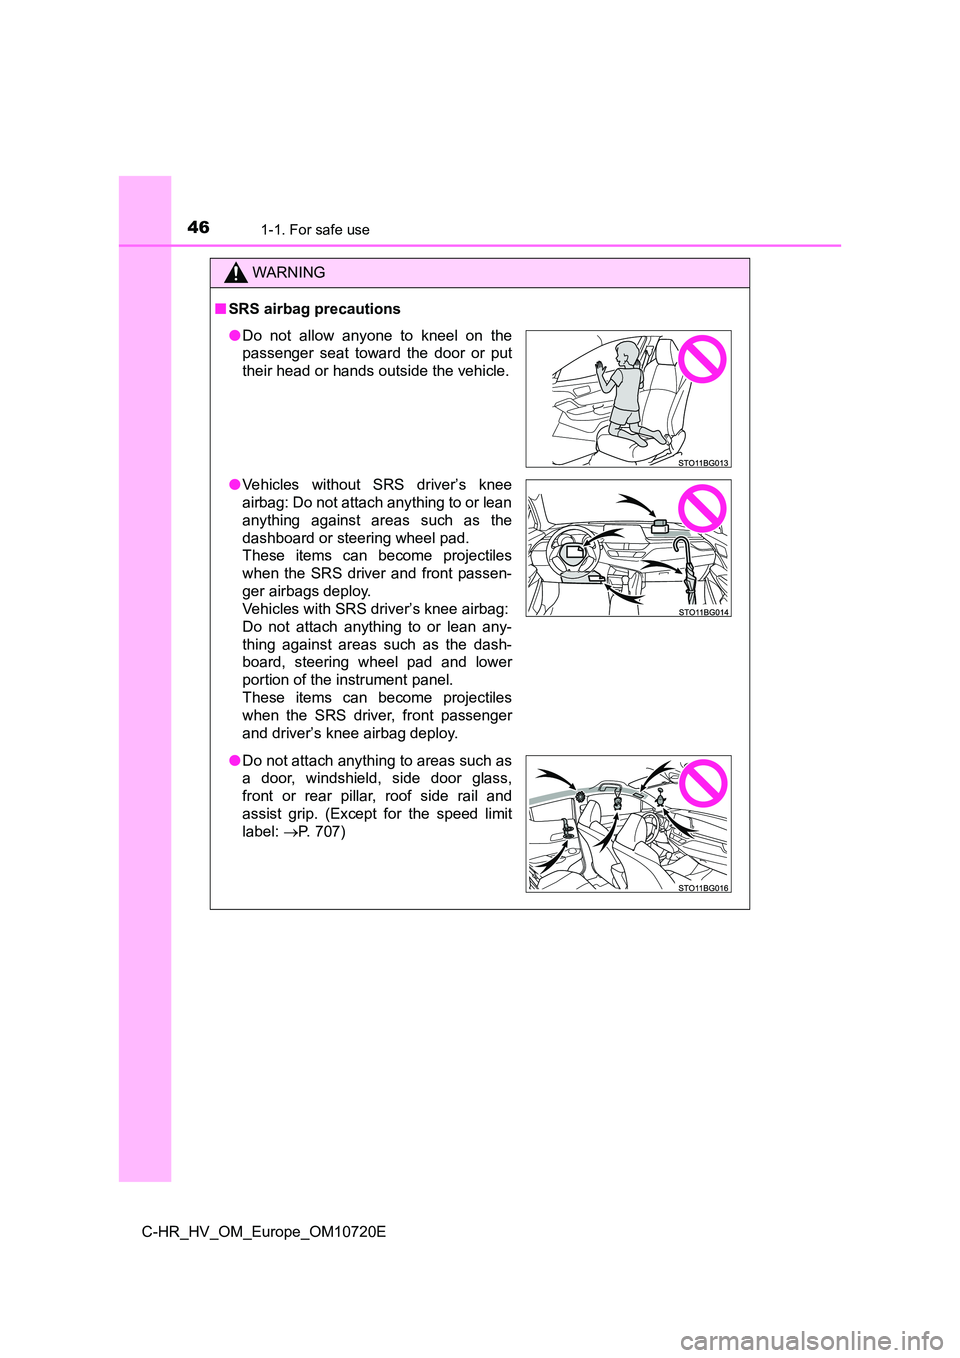 TOYOTA C-HR 2022  Owners Manual 461-1. For safe use
C-HR_HV_OM_Europe_OM10720E
WARNING
■SRS airbag precautions
●Do  not  allow  anyone  to  kneel  on  the 
passenger  seat  toward  the  door  or  put 
their head or hands outside